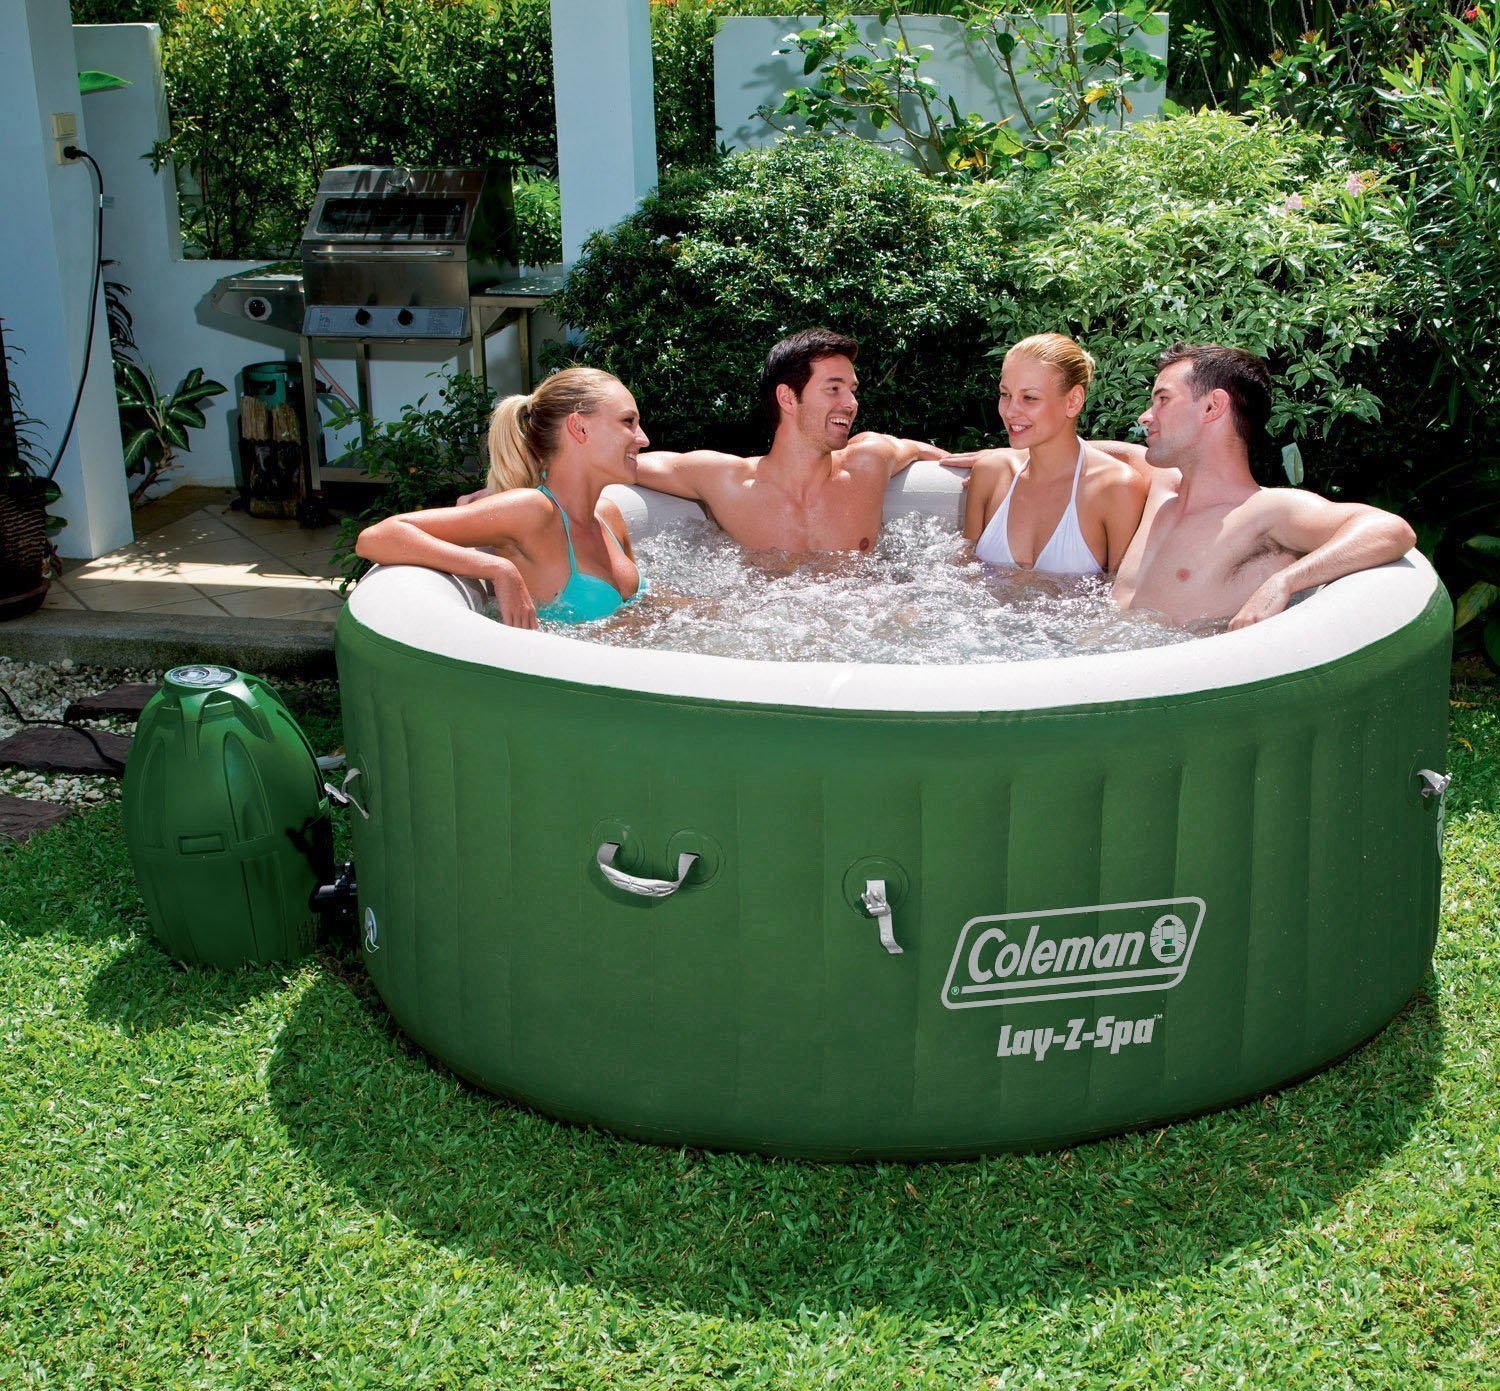 Coleman Lay Z Spa Inflatable Hot Tub Review 